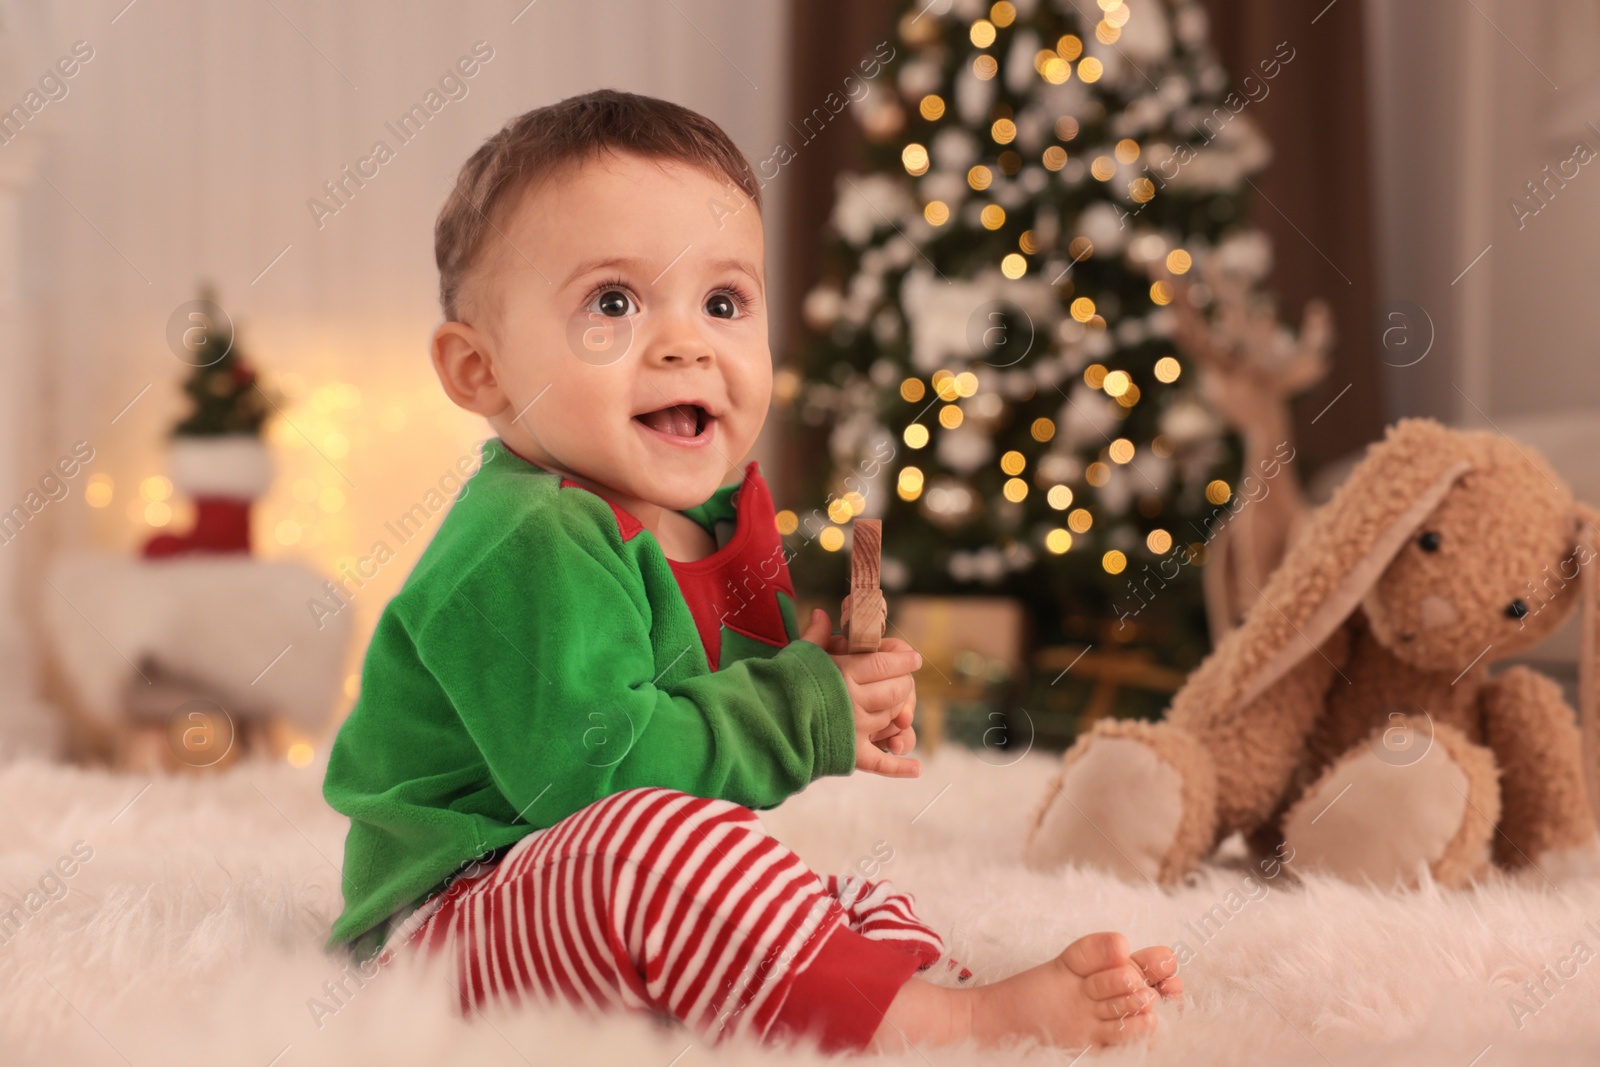 Photo of Baby wearing cute elf costume on floor in room decorated for Christmas